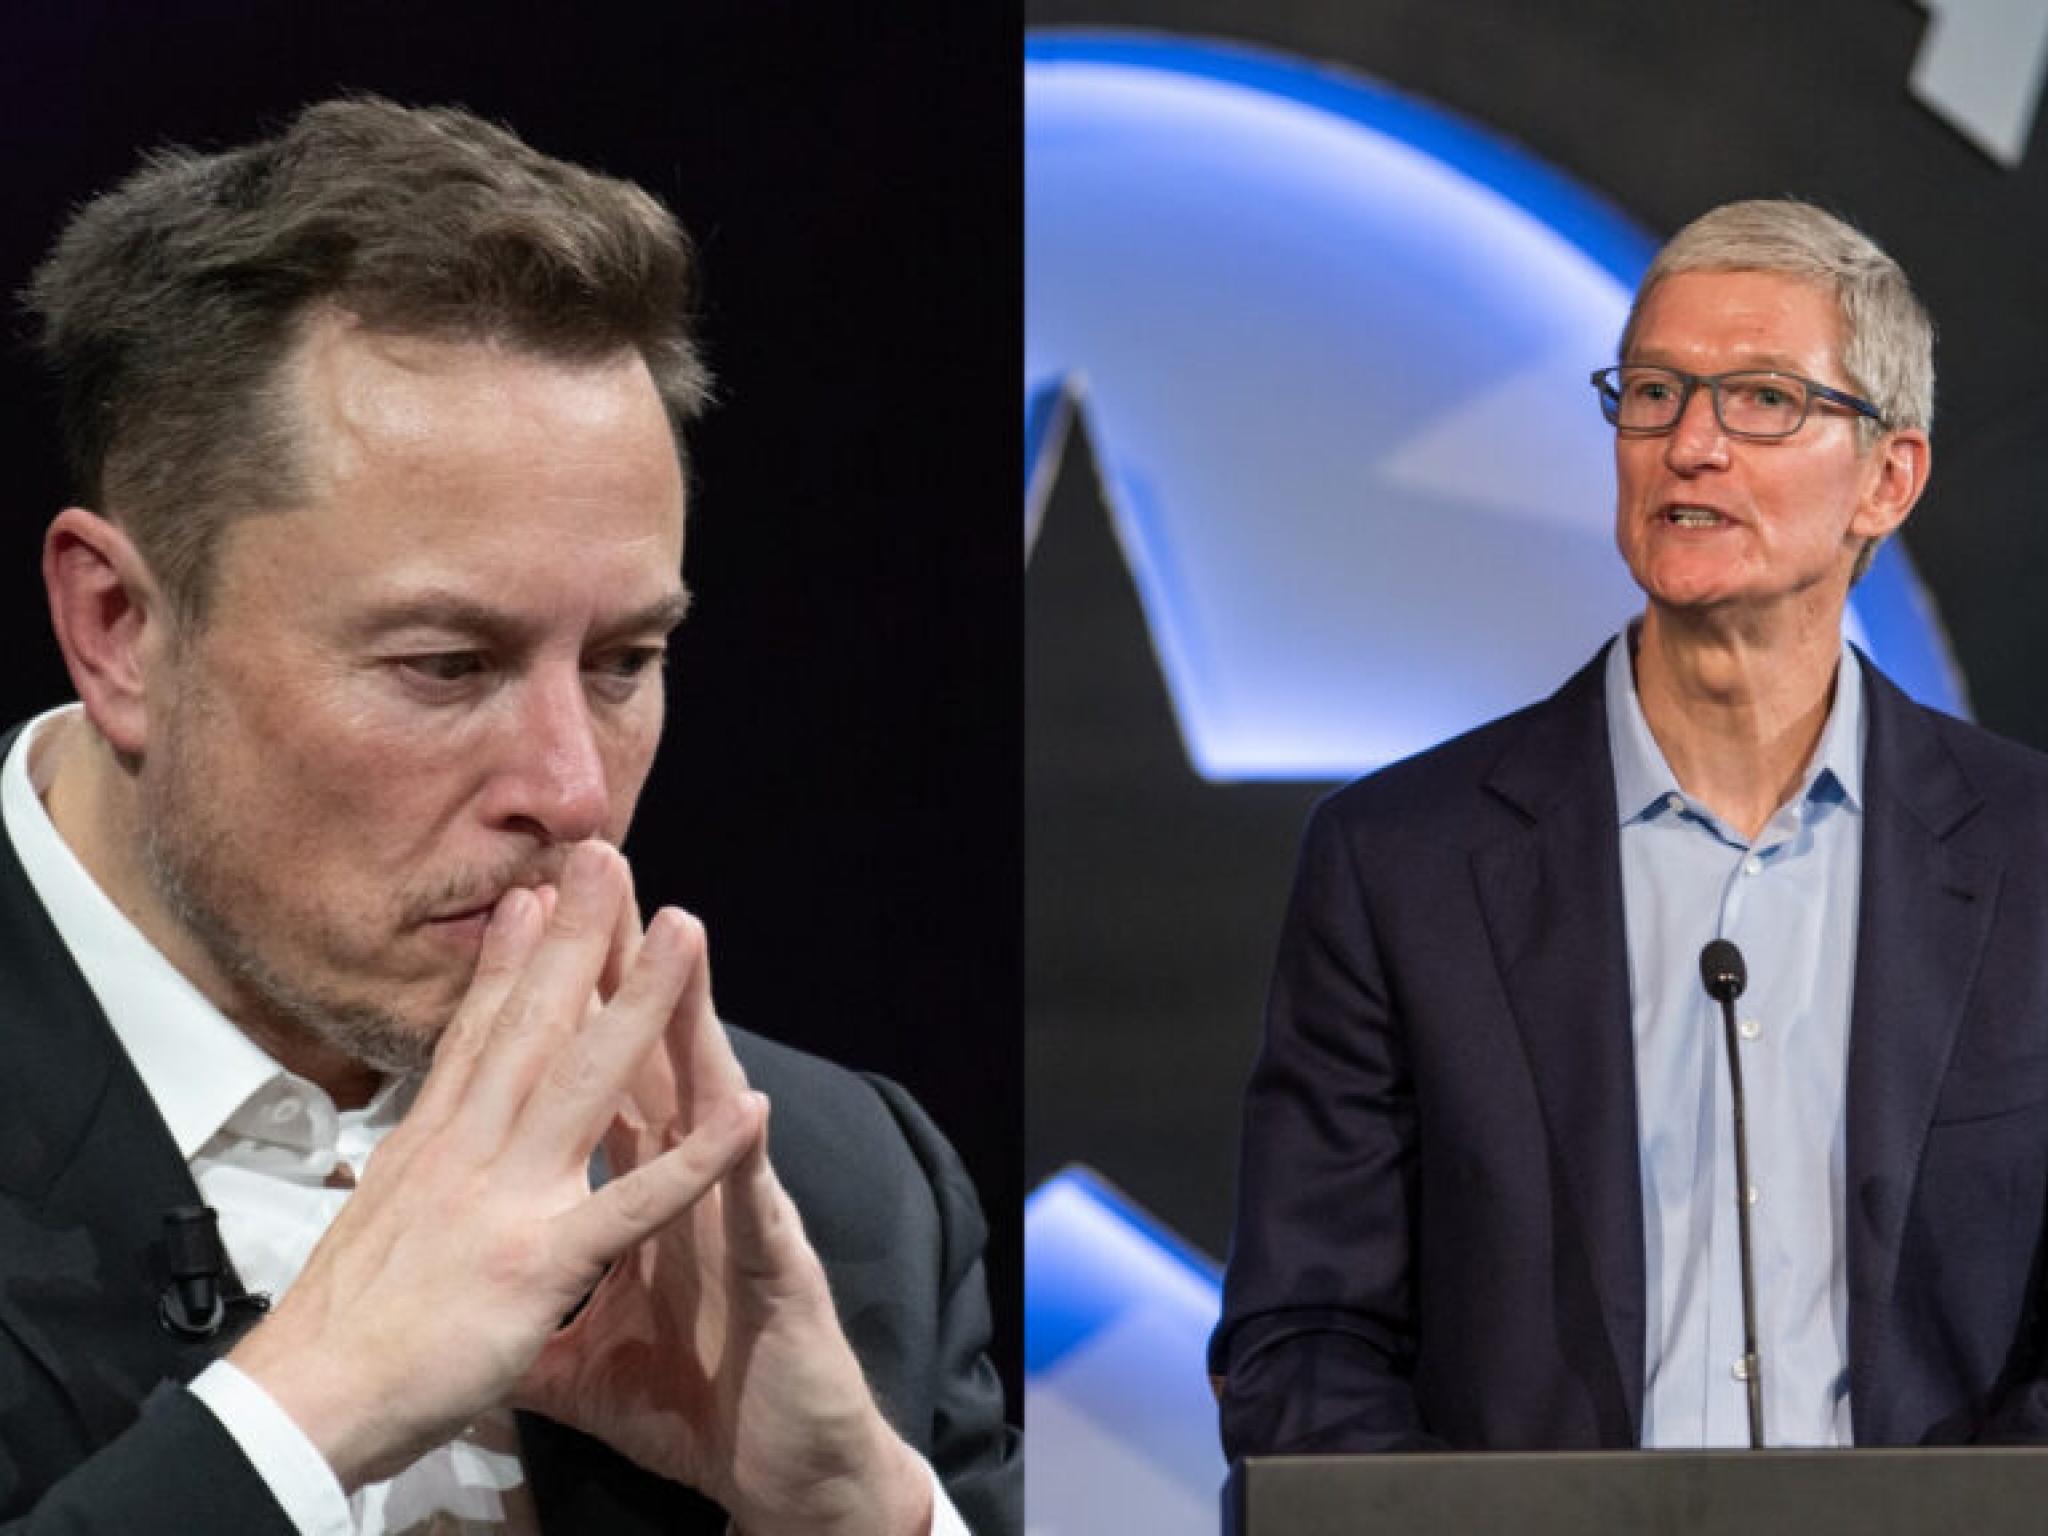  apple-and-tesla-only-two-companies-able-to-thread-the-needle-in-terms-of-china-us-says-top-analyst-after-tim-cook-and-elon-musks-recent-china-visits 